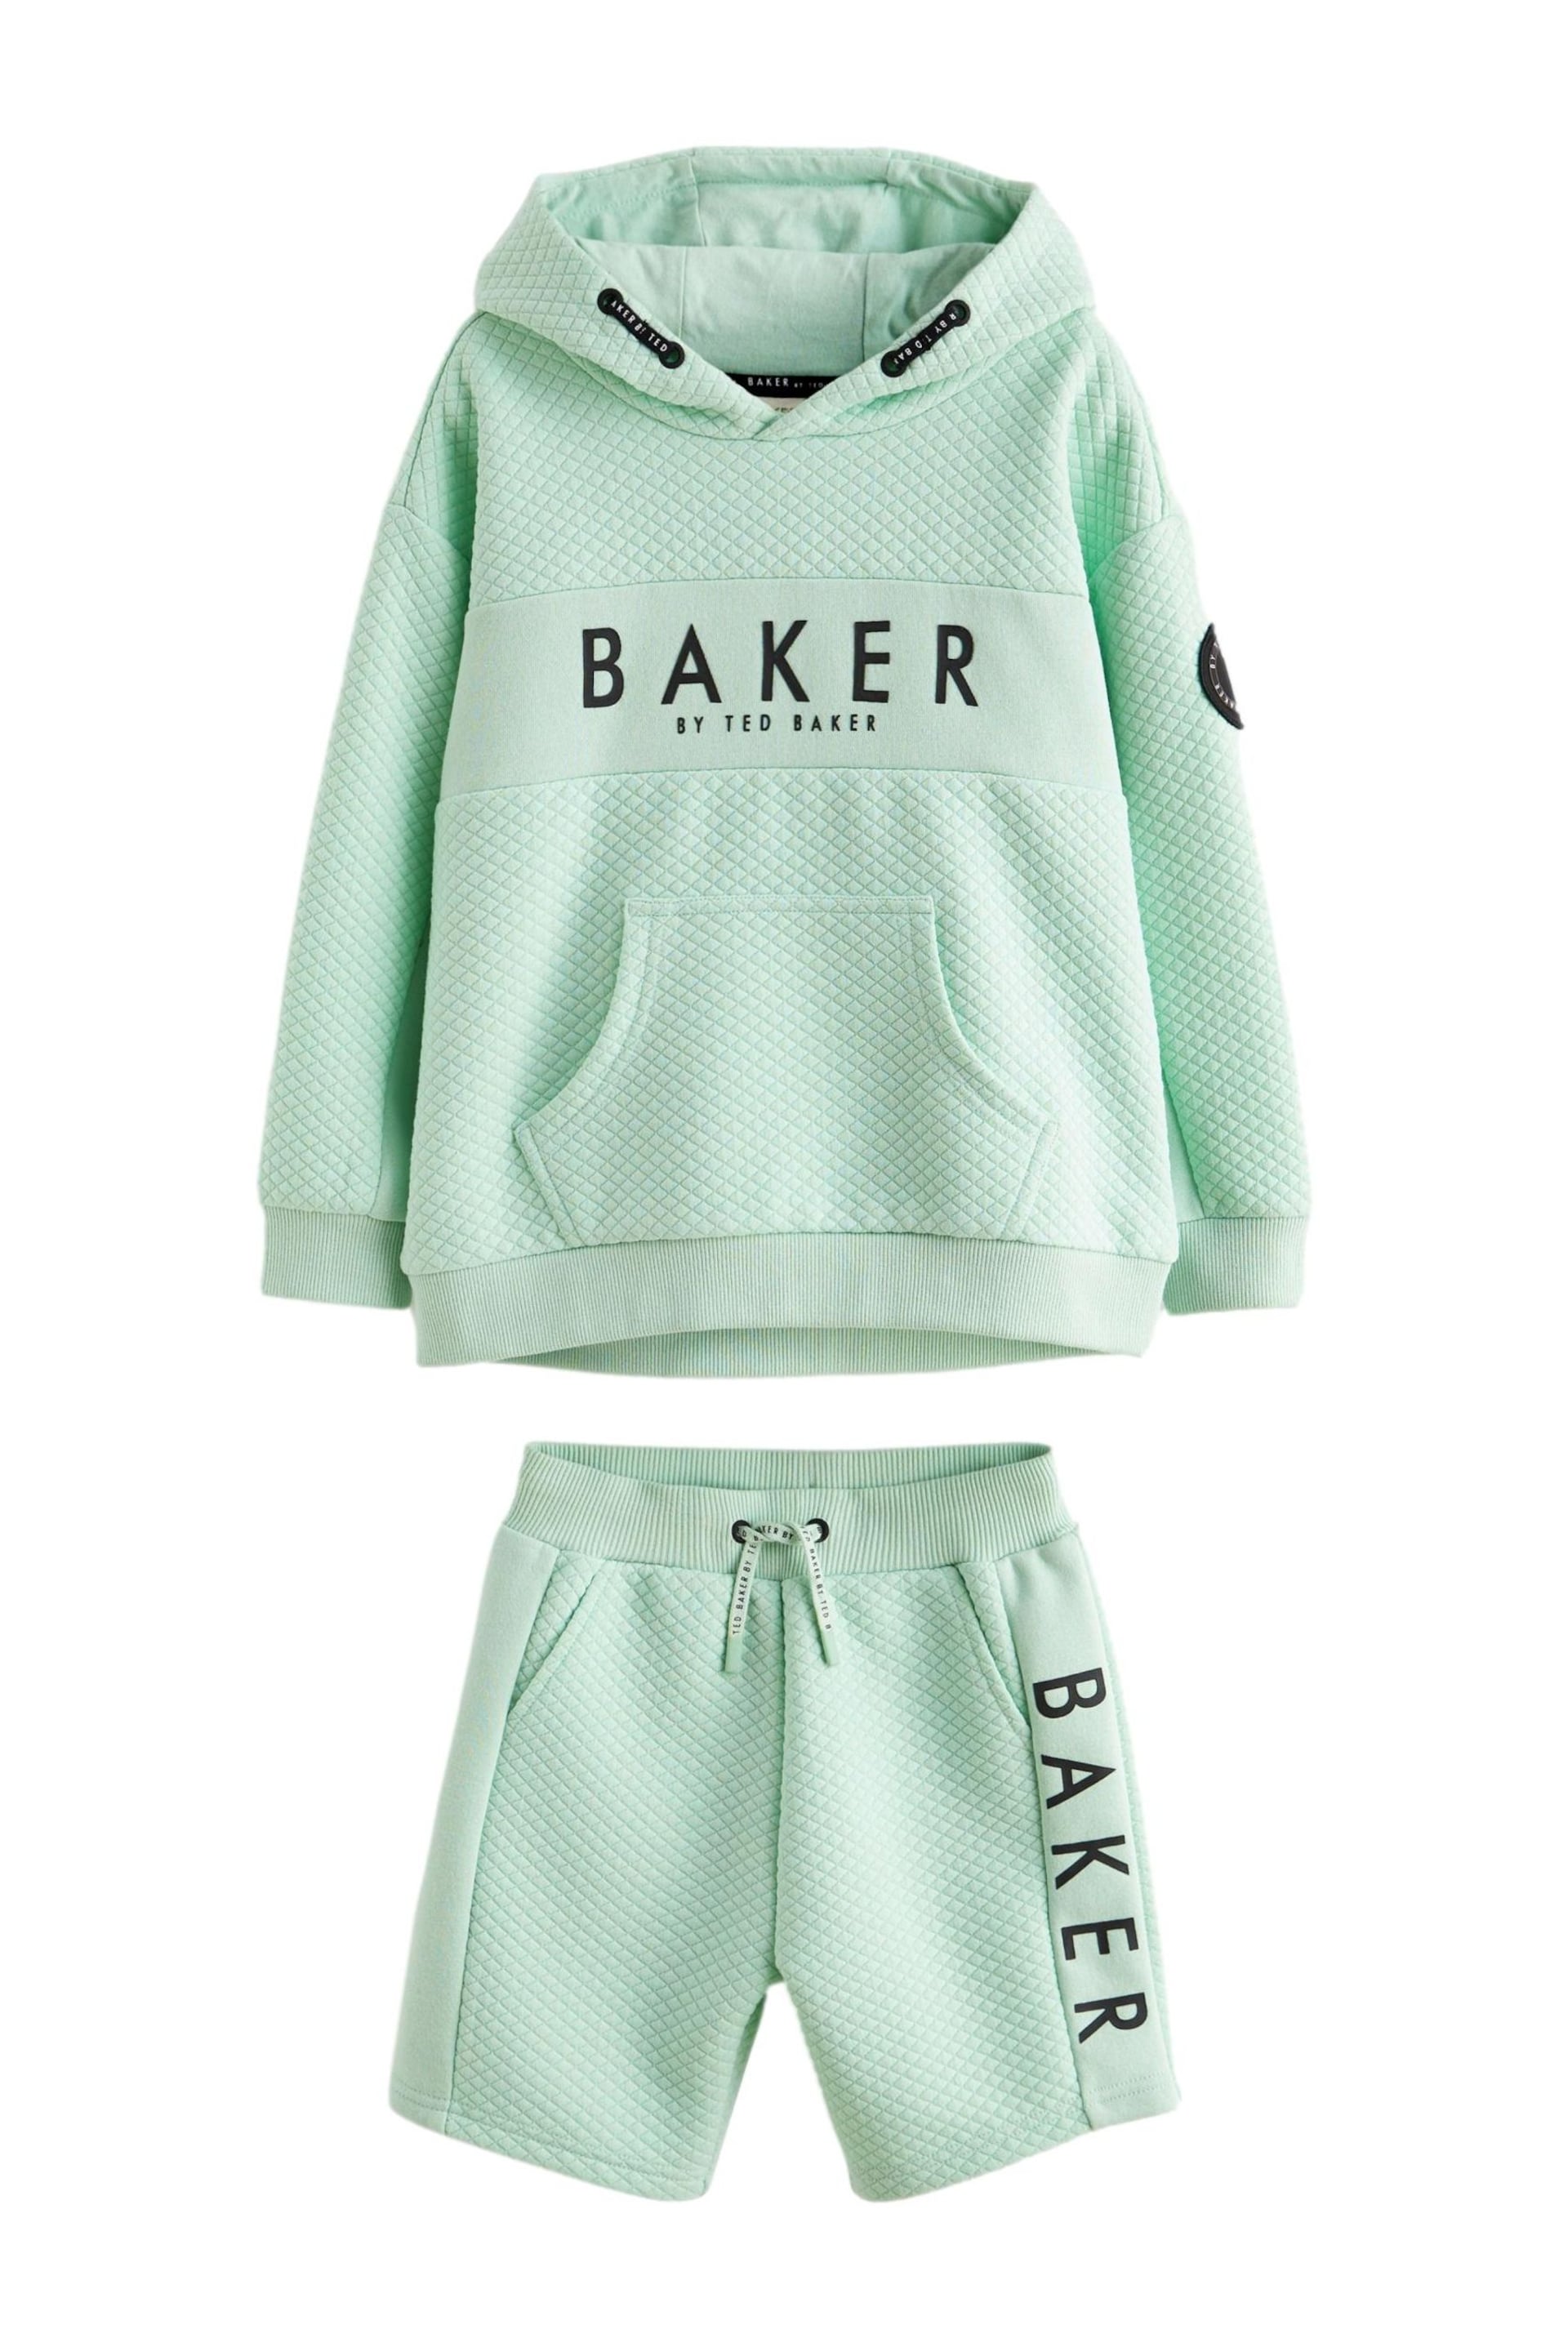 Baker by Ted Baker Textured Hoodie And Shorts Set - Image 1 of 1